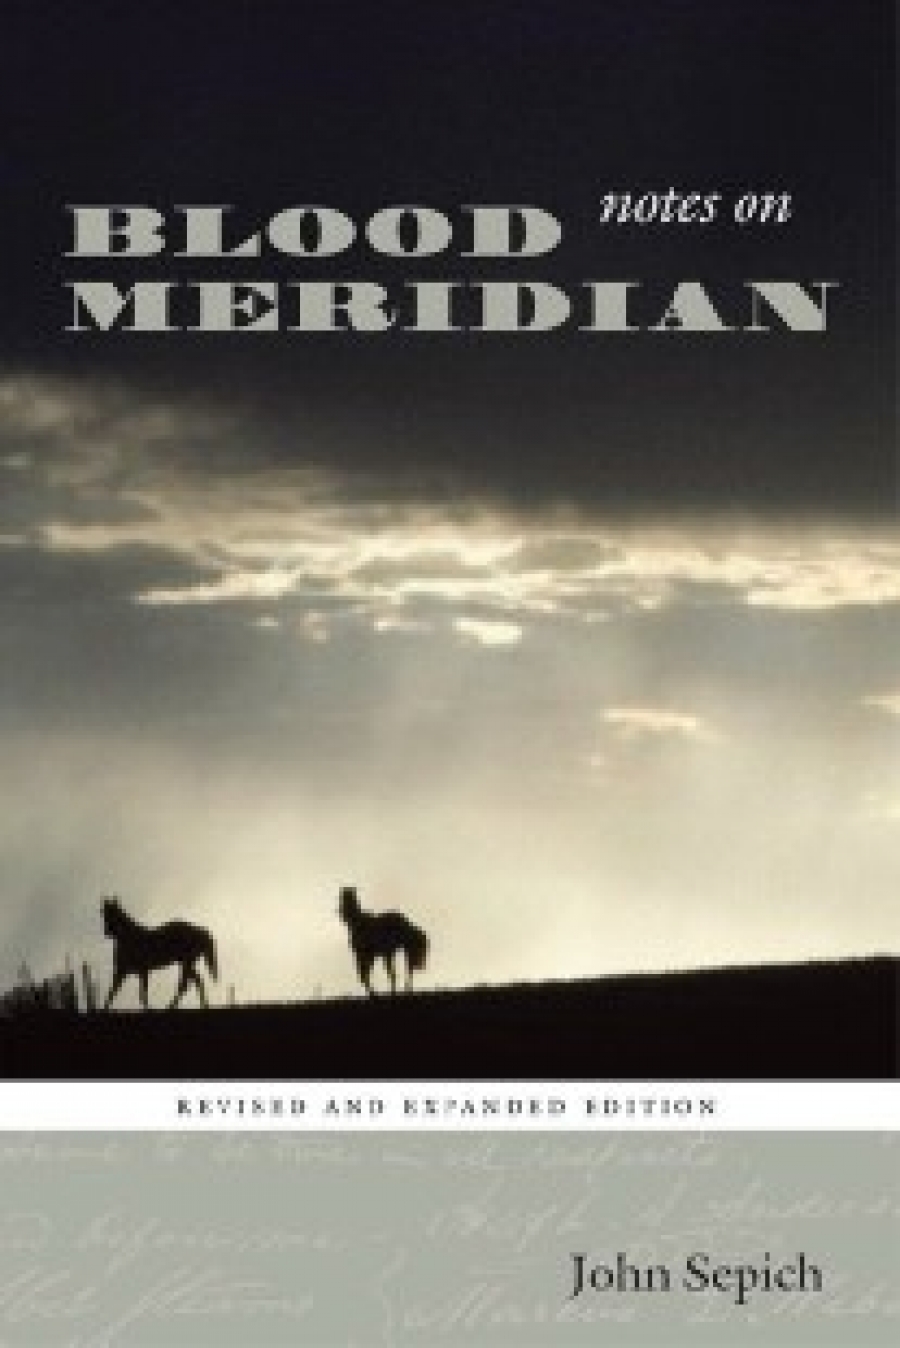 John, Sepich Notes on blood meridian 